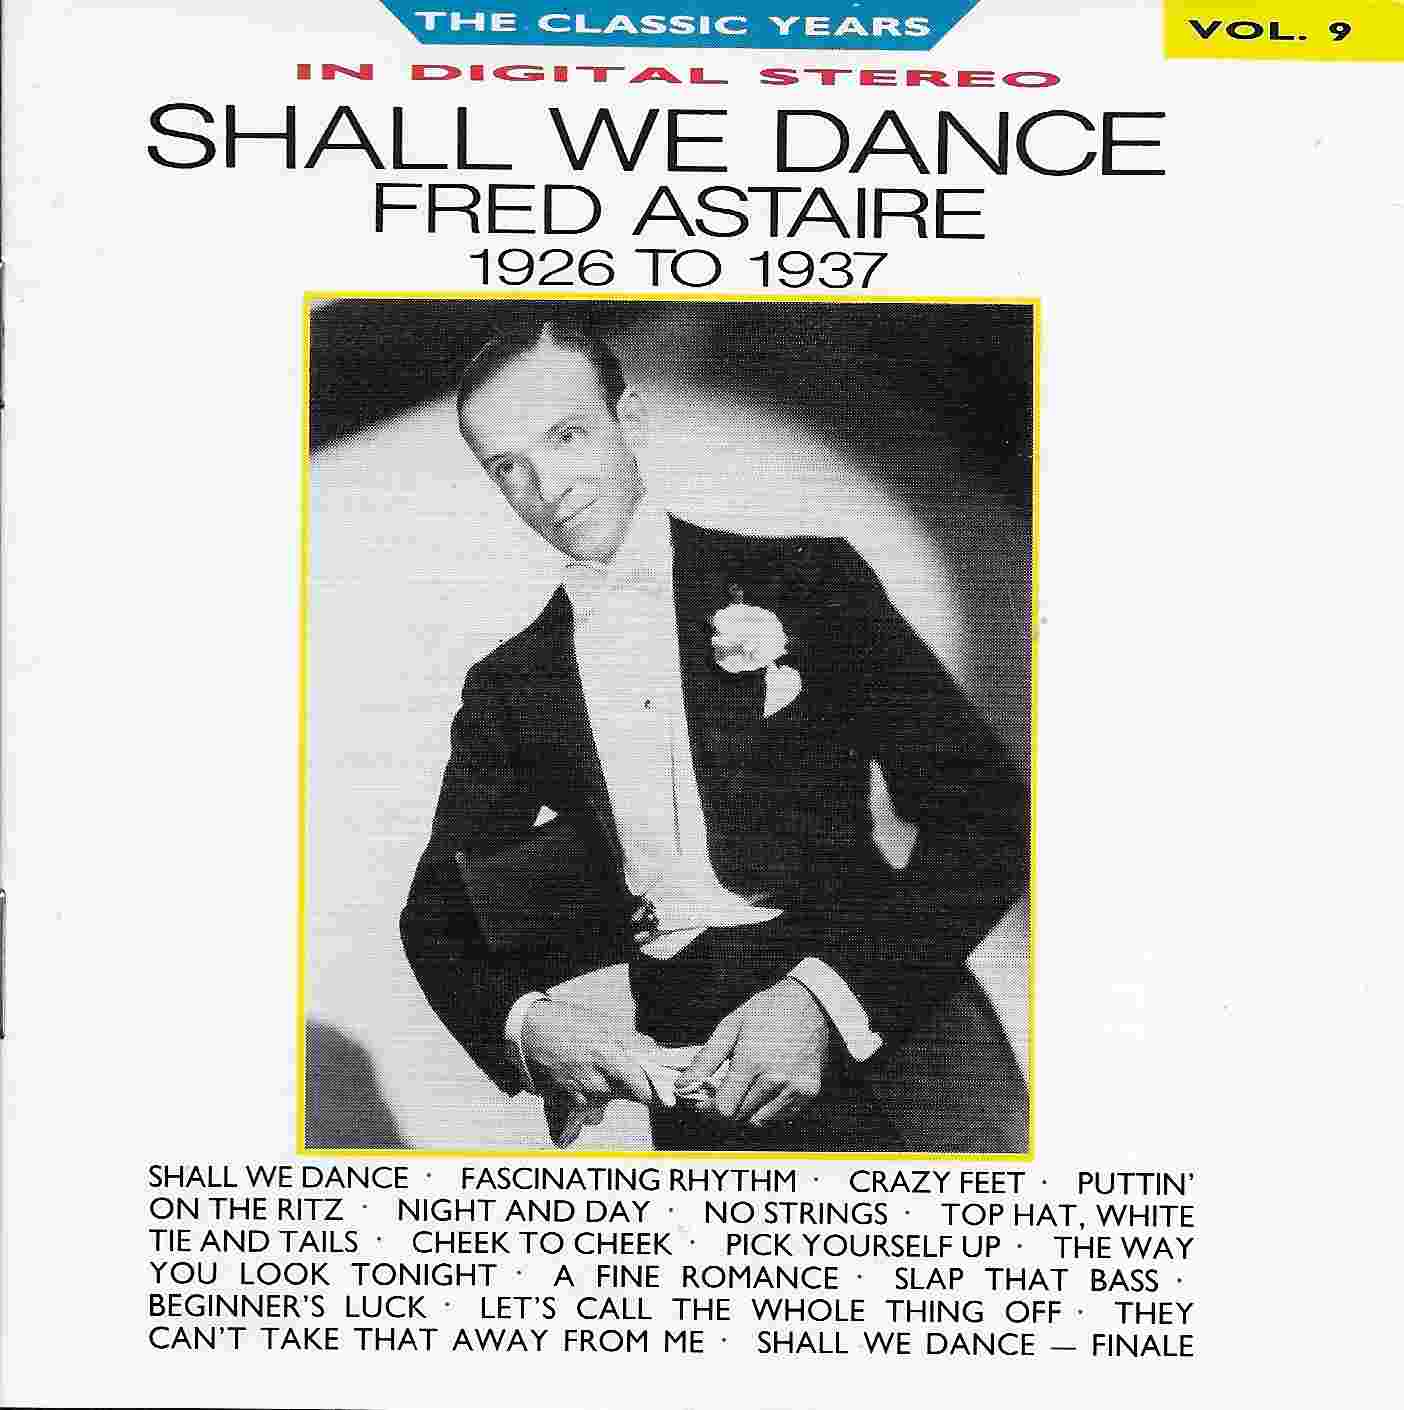 Picture of Classic years - Volume 9, Fred Astaire by artist Fred Astaire from the BBC cds - Records and Tapes library